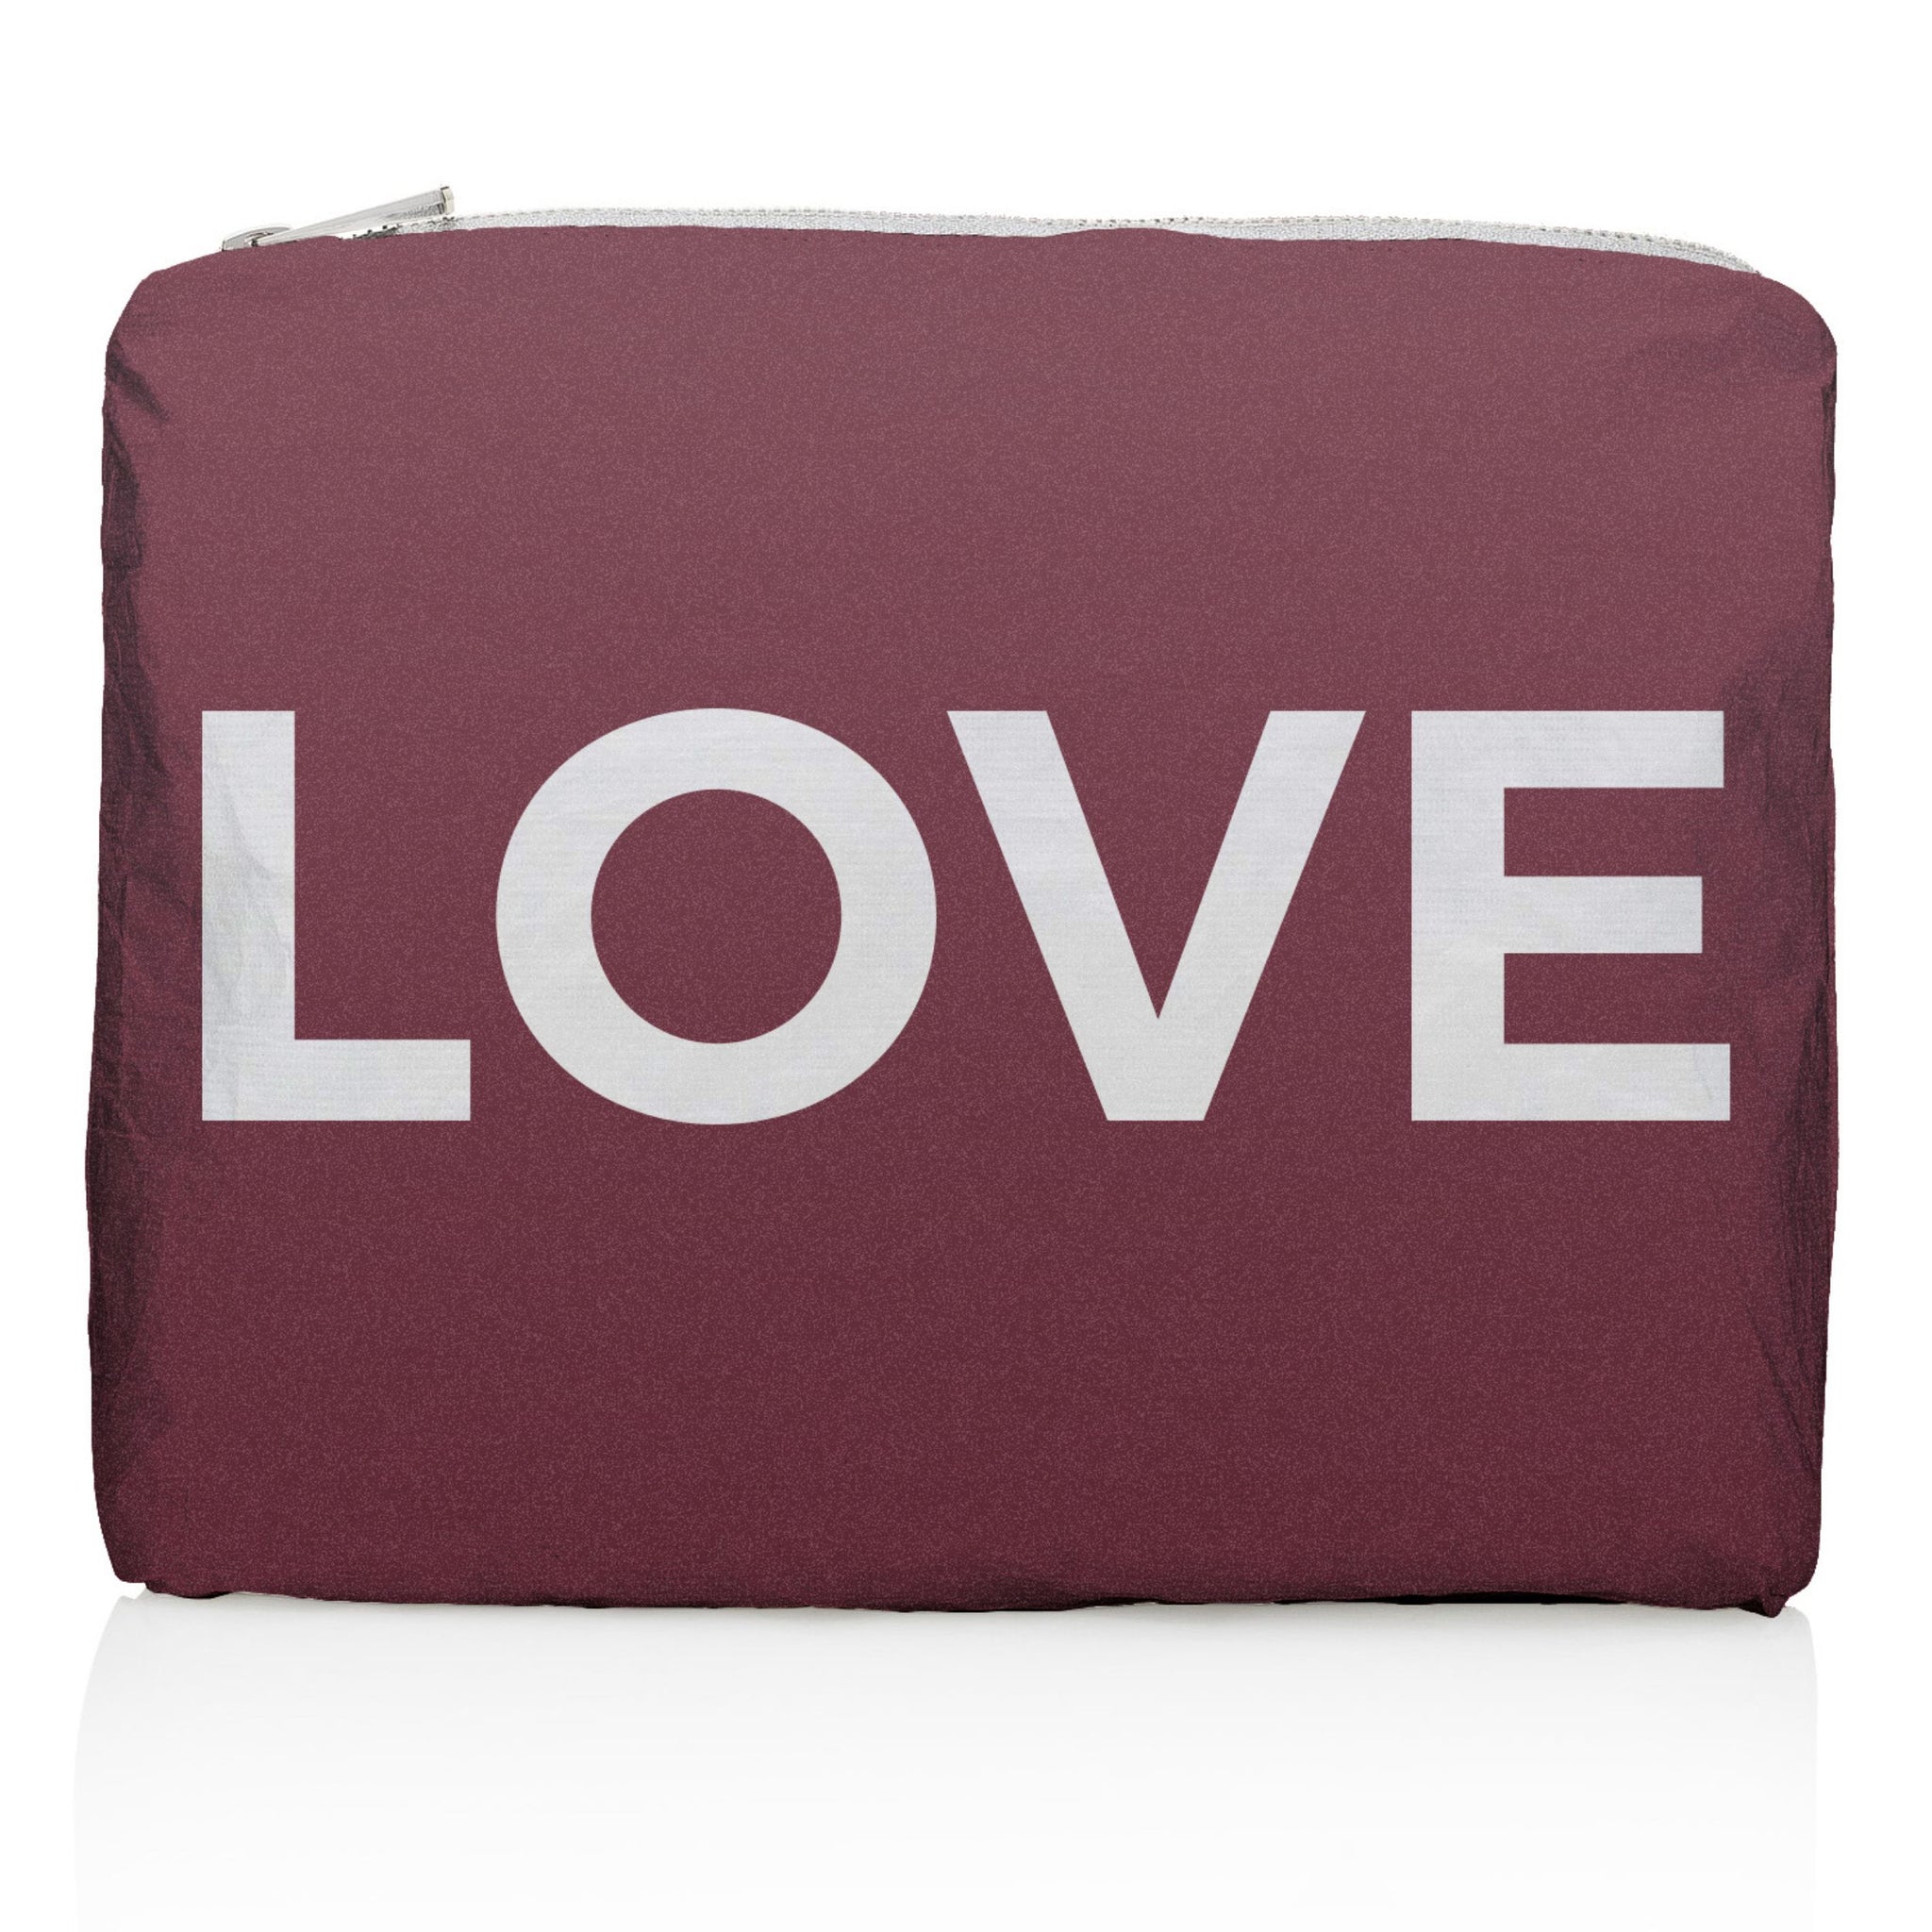 Medium zipper pouch in shimmer cabernet with silver "LOVE"